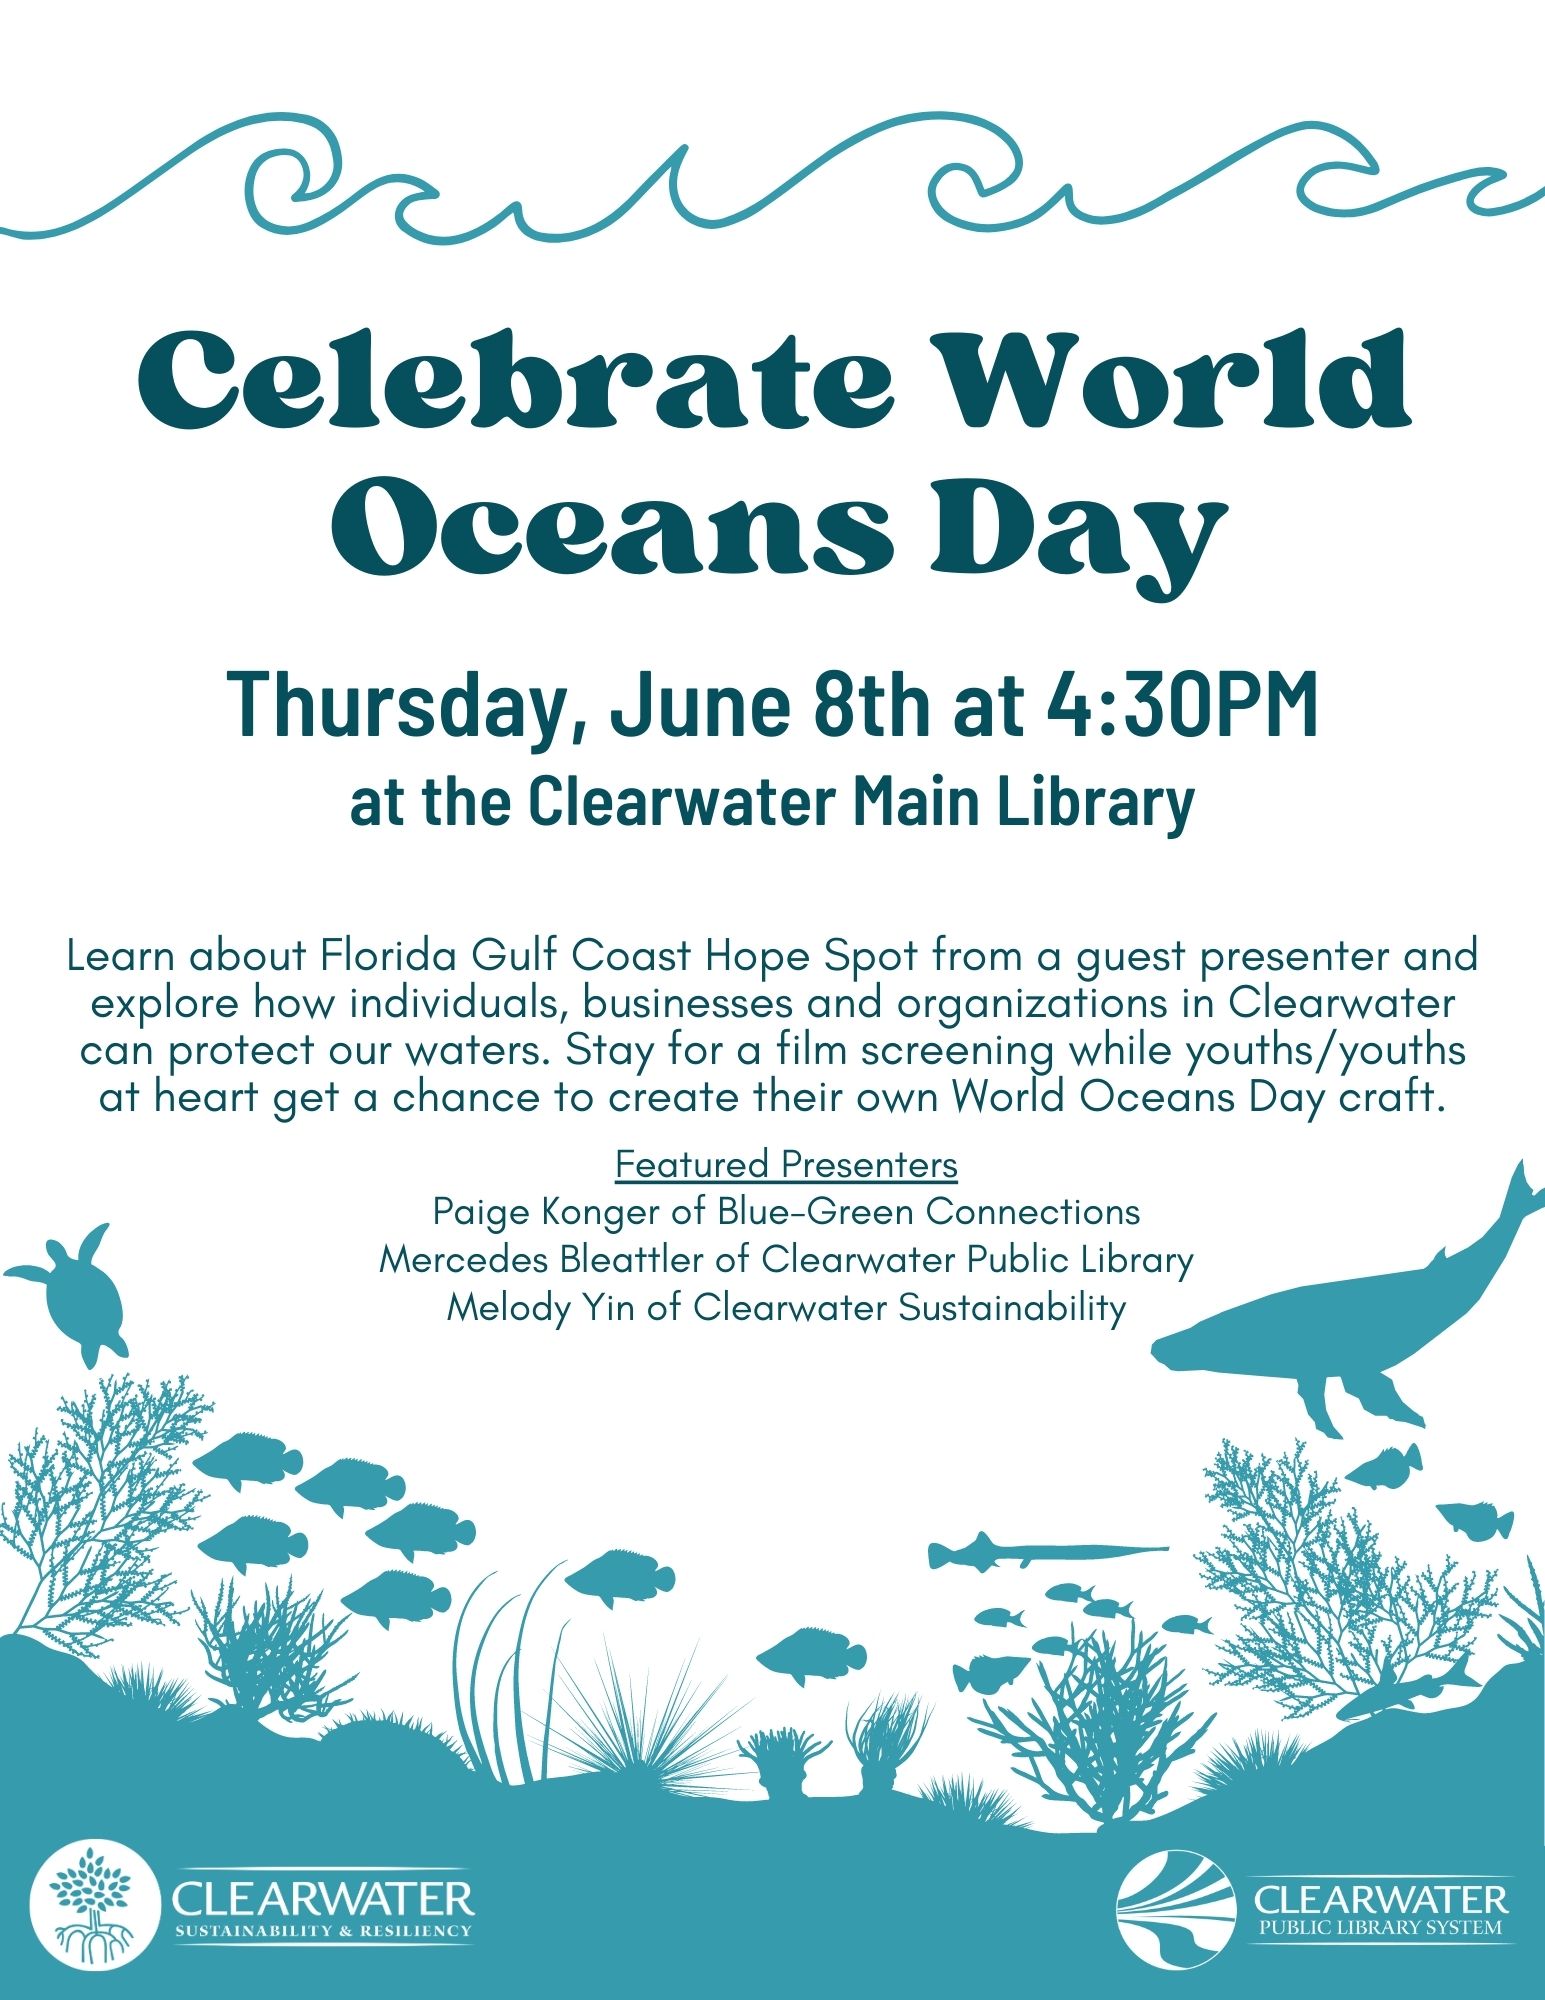 Poster that includes ocean related graphics, a text that includes time and place: June 8th at 4:30, description: "Learn about Florida Gulf Coast Hope Spot from a guest presenter and explore how individuals, businesses and organizations in Clearwater can protect our waters. Stay for a film screening while youths/youths at heart get a chance to create their own World Oceans Day craft.", and a list of speakers.